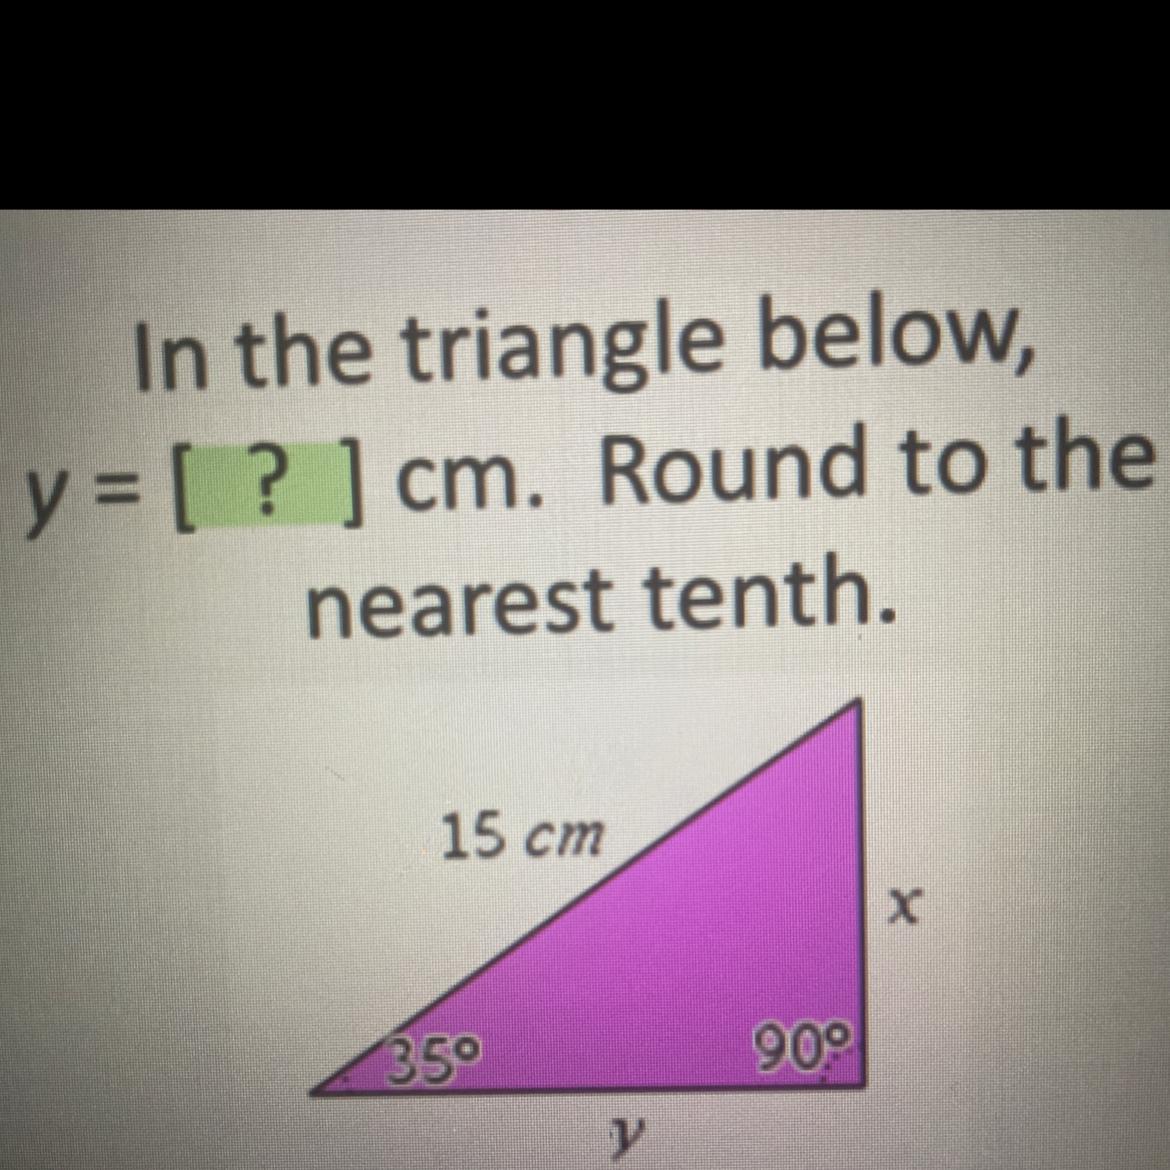 In The Triangle Below,y = [? ] Cm. Round To Thenearest Tenth.15 CmX35909